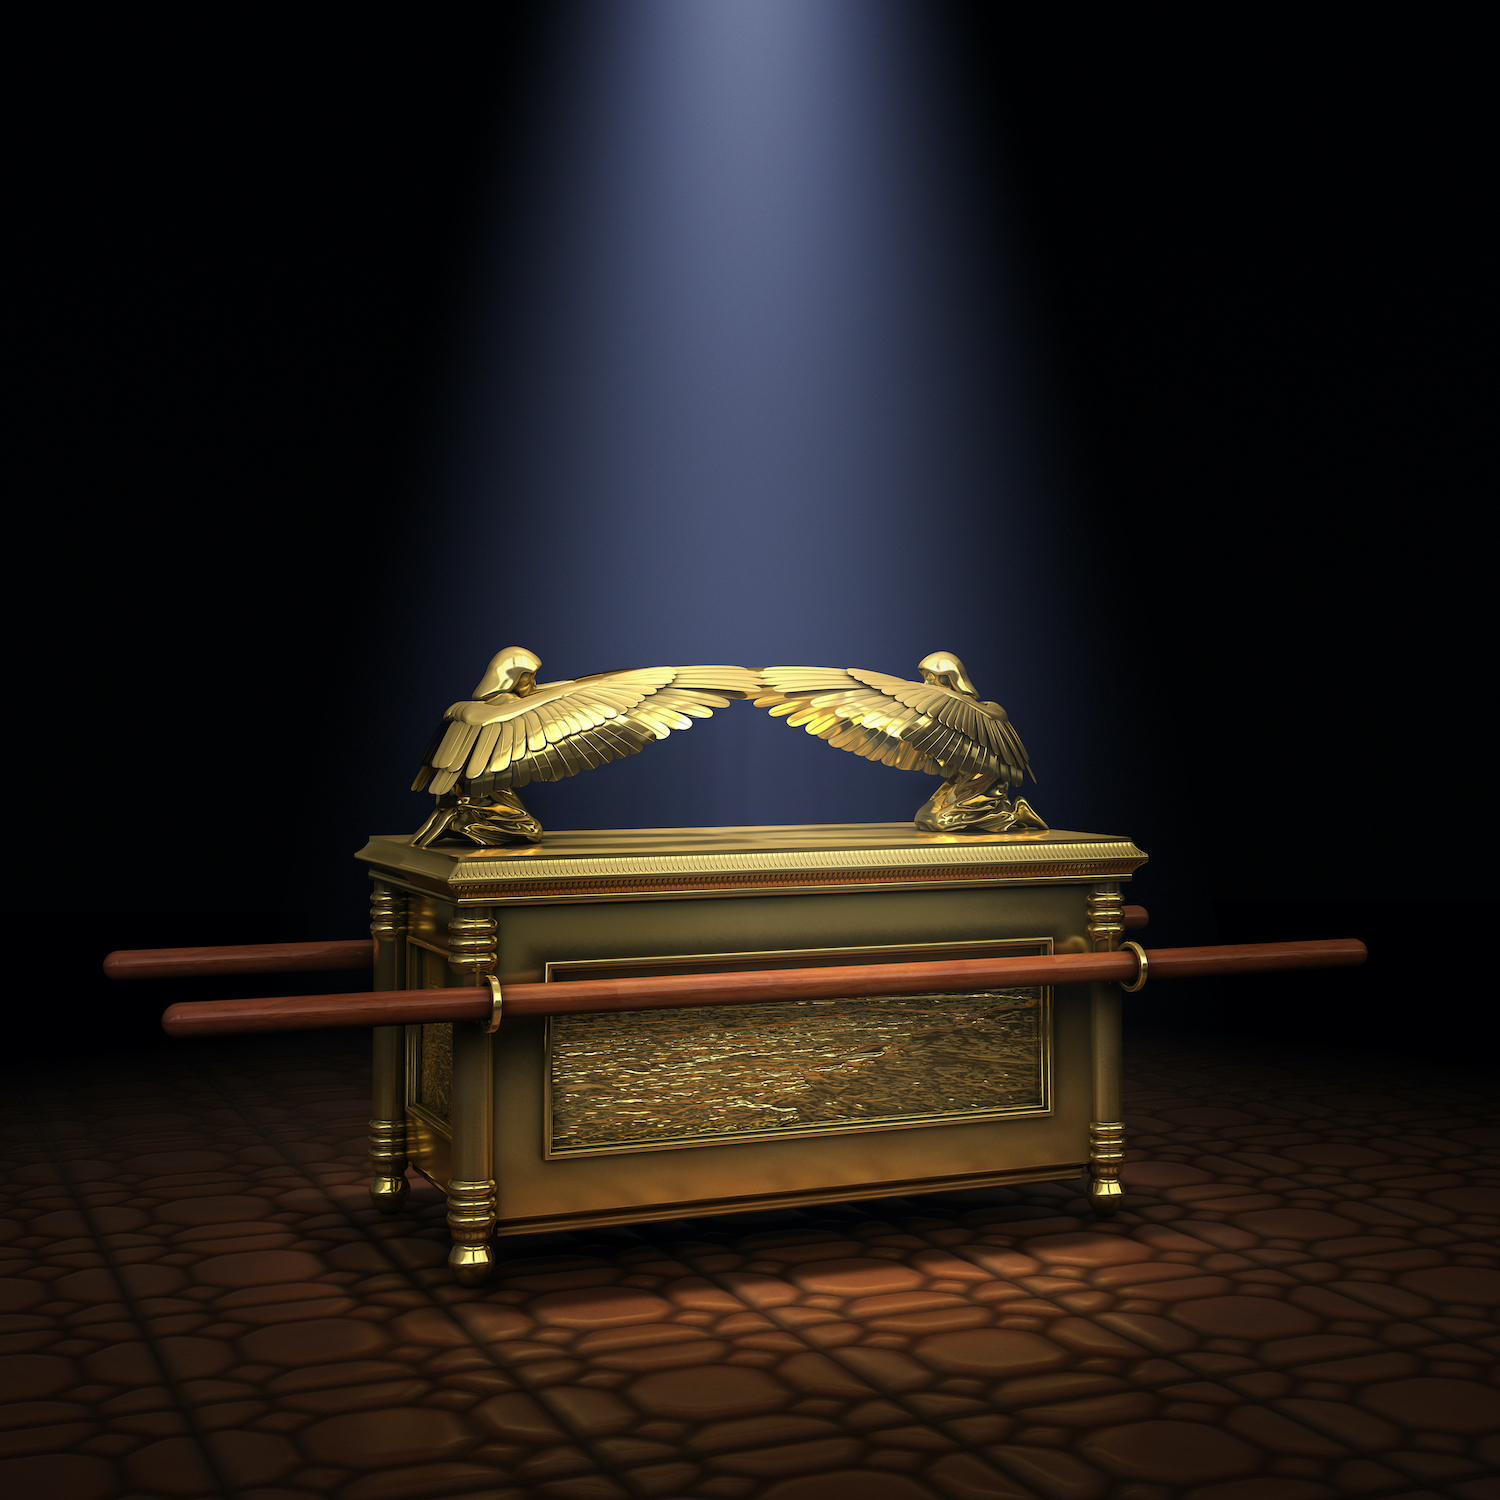 Image of Ark of the Covenant